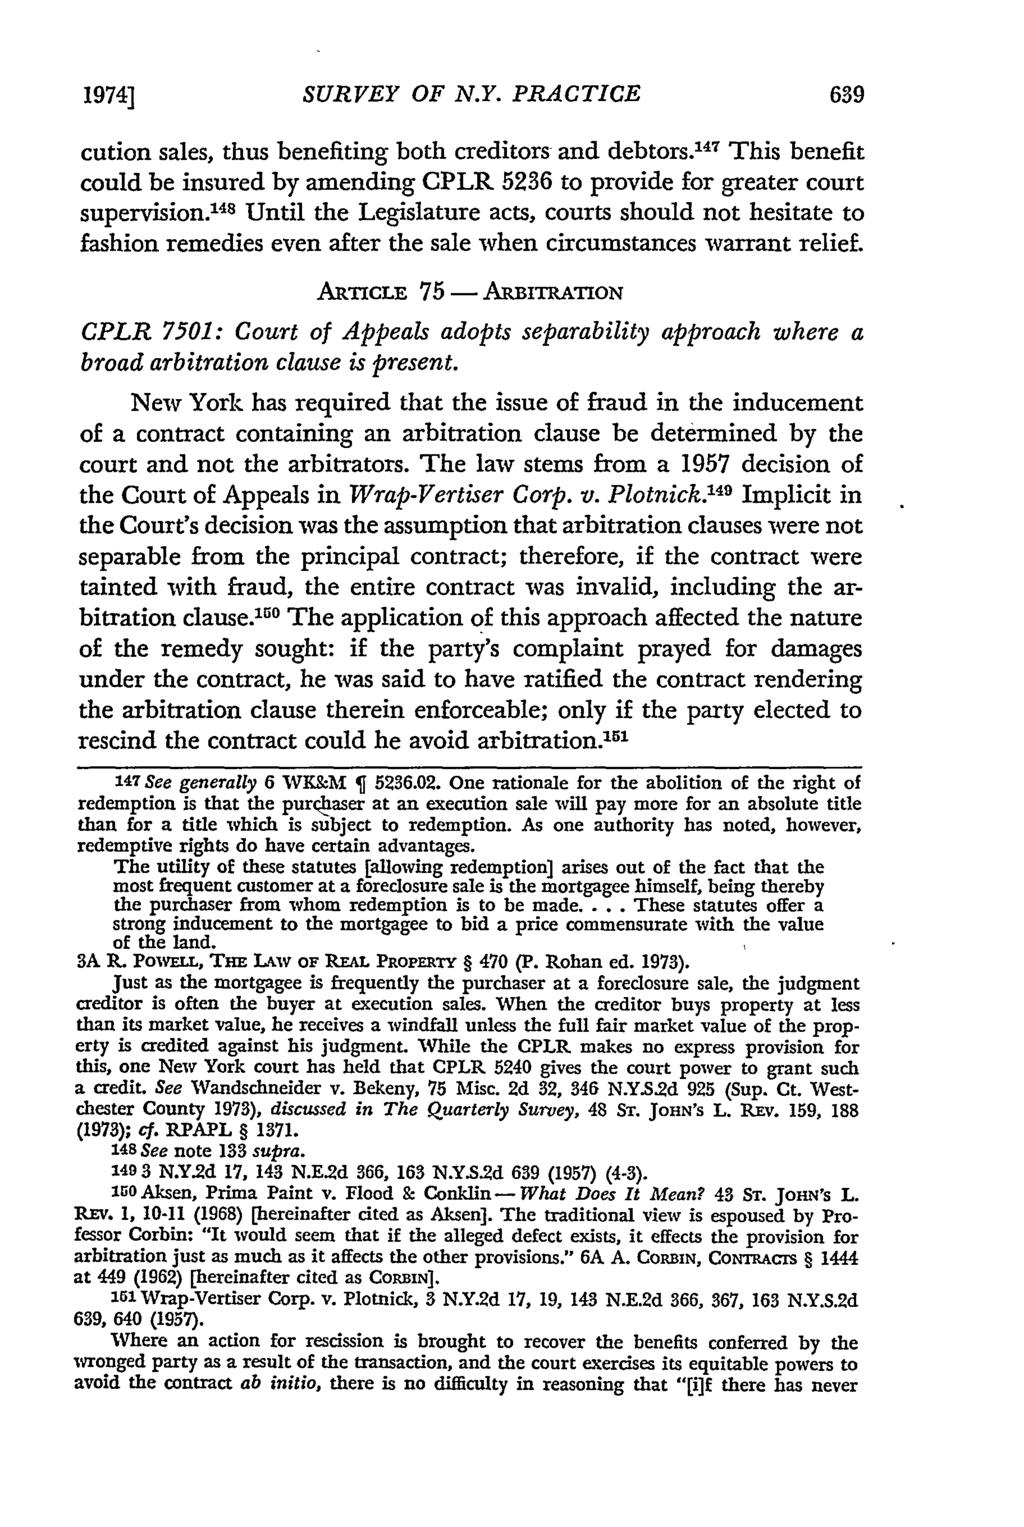 1974] SURVEY OF N.Y. PRACTICE cution sales, thus benefiting both creditors and debtors. 147 This benefit could be insured by amending CPLR 5236 to provide for greater court supervision.